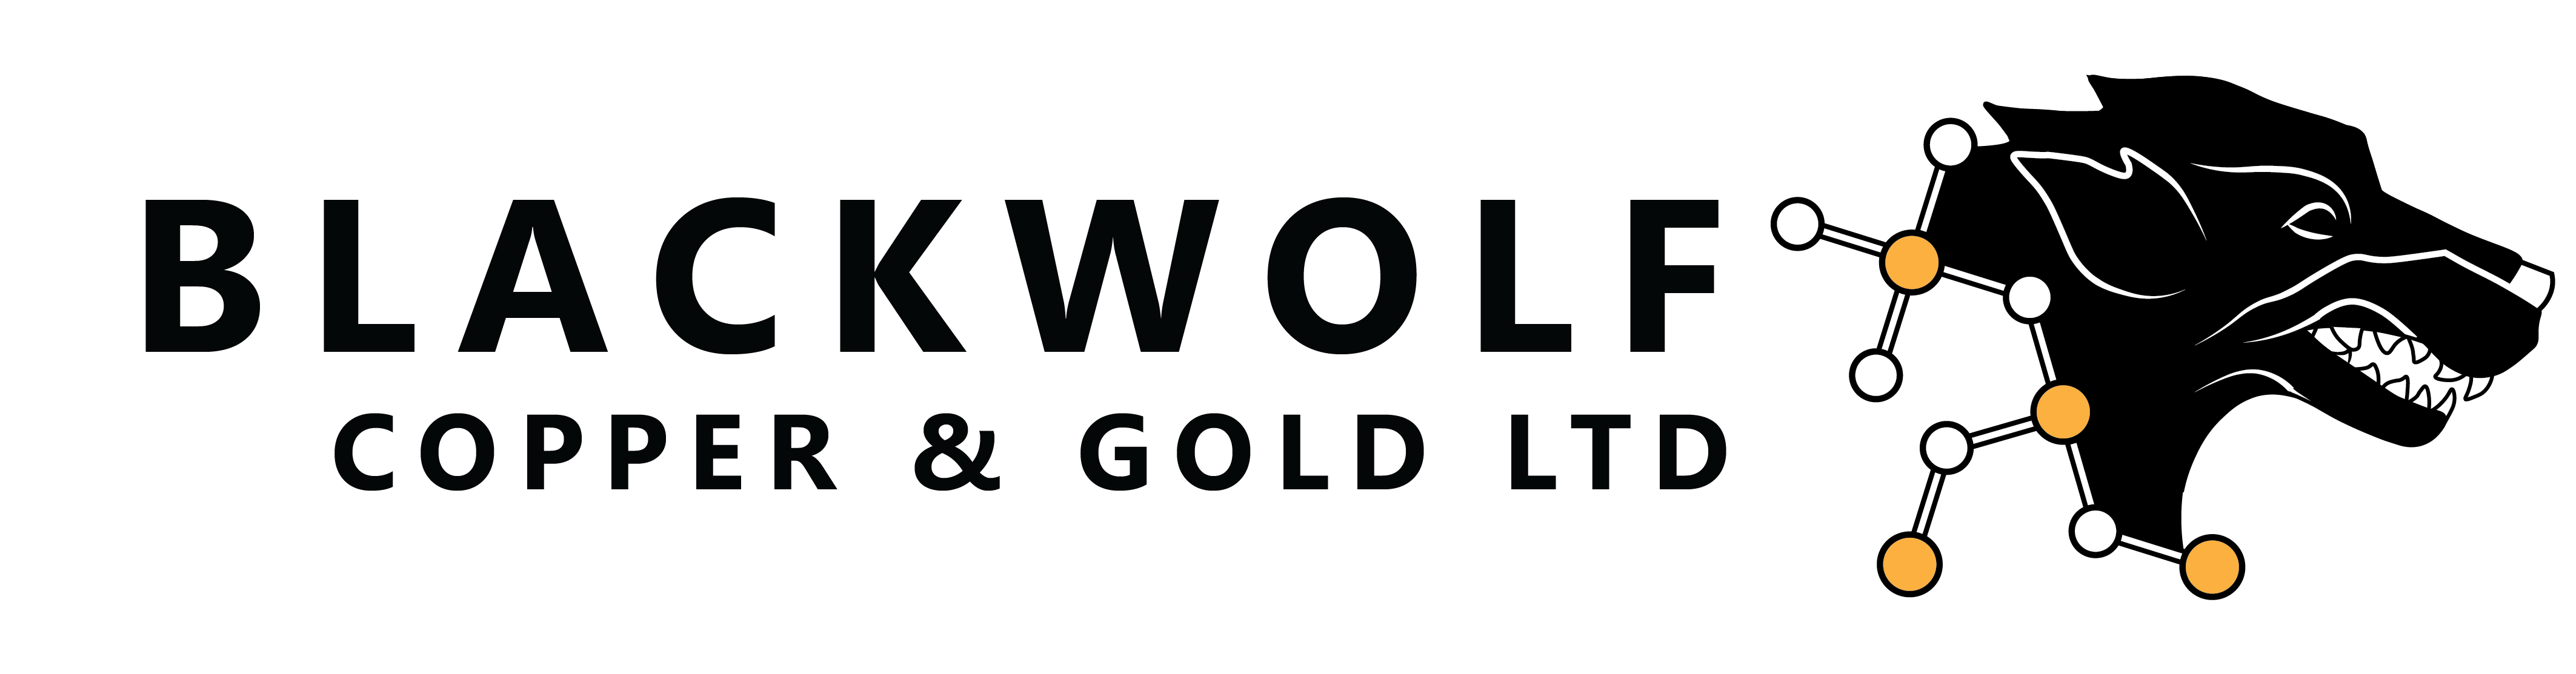 Blackwolf Copper and Gold Limited